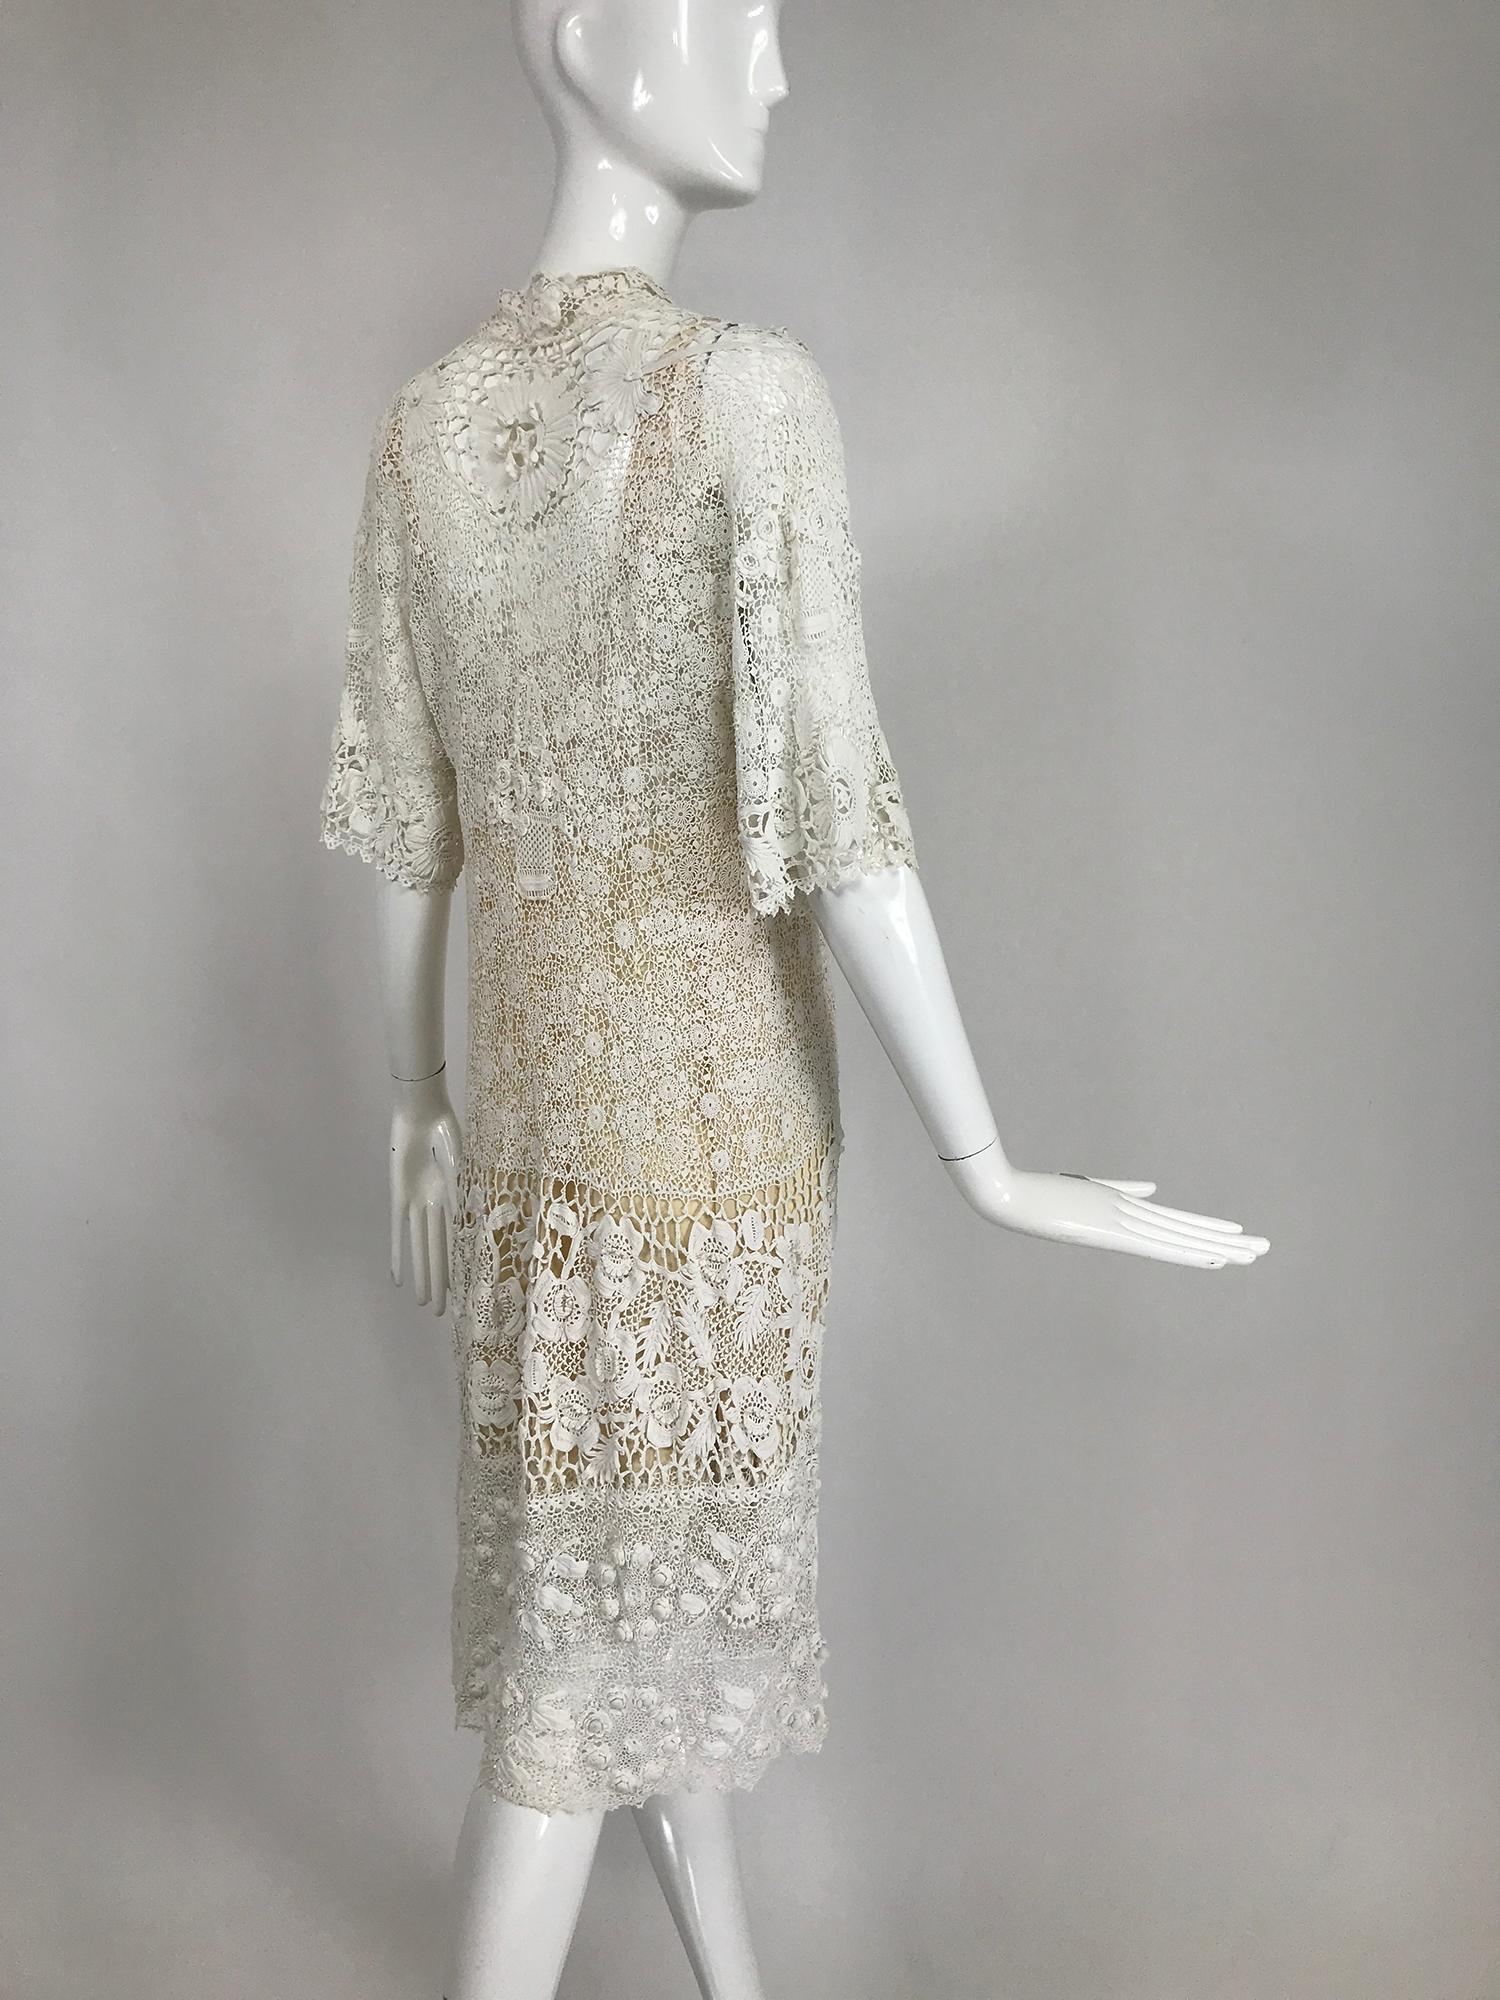 1920s Irish Lace hand crocheted wedding dress or day dress together with the original silk and lace slip. This beautiful dress features all the finest examples of this art, large scale three dimensional flowers that bloom throughout the design, fine